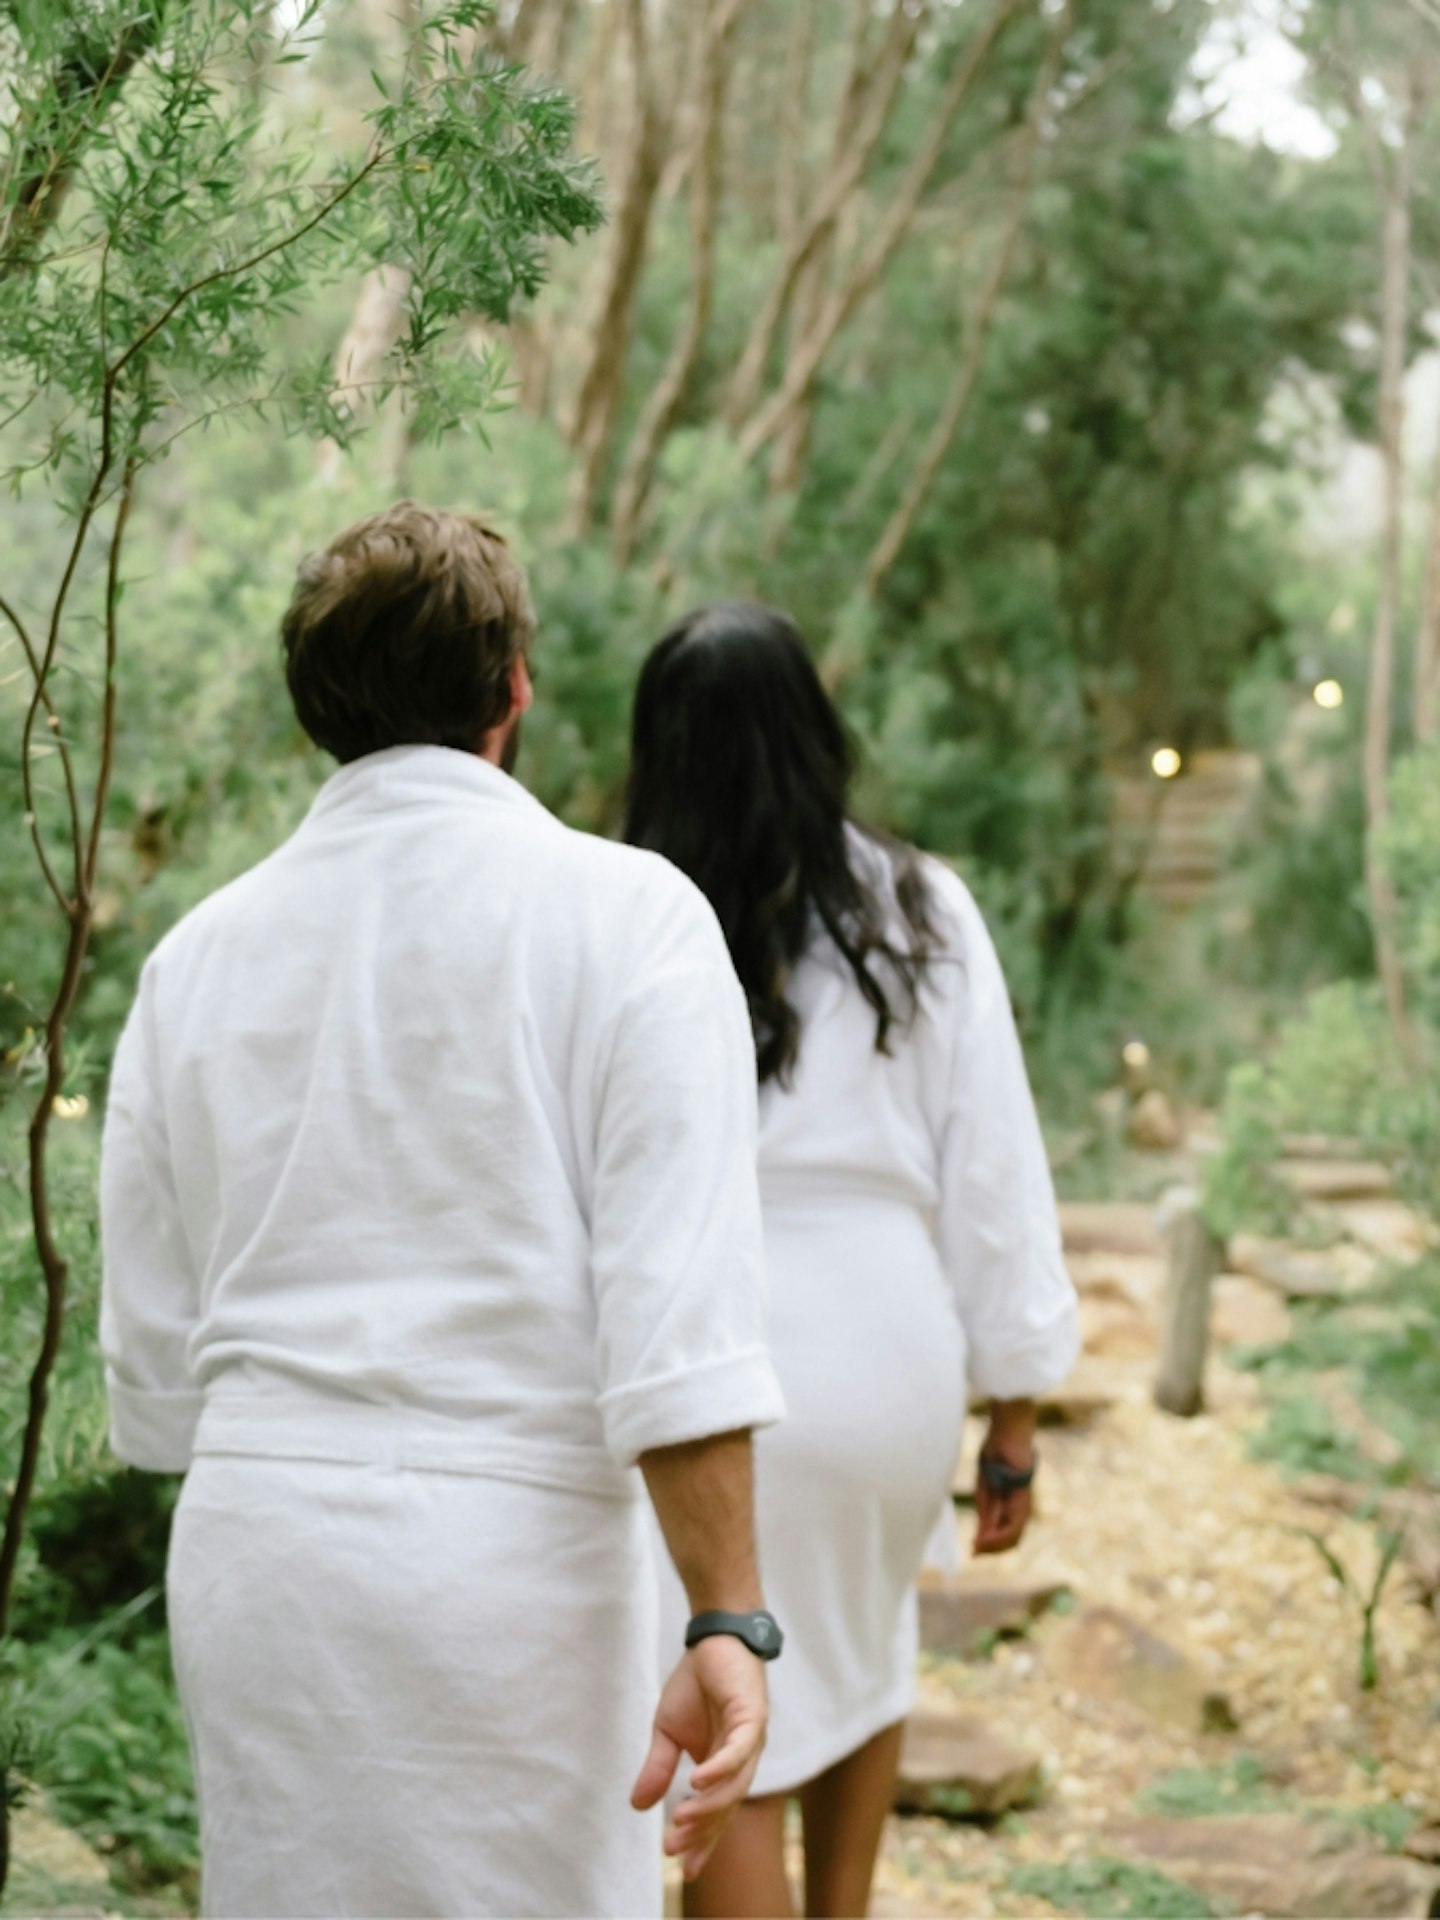 Two people walking through nature in white robes